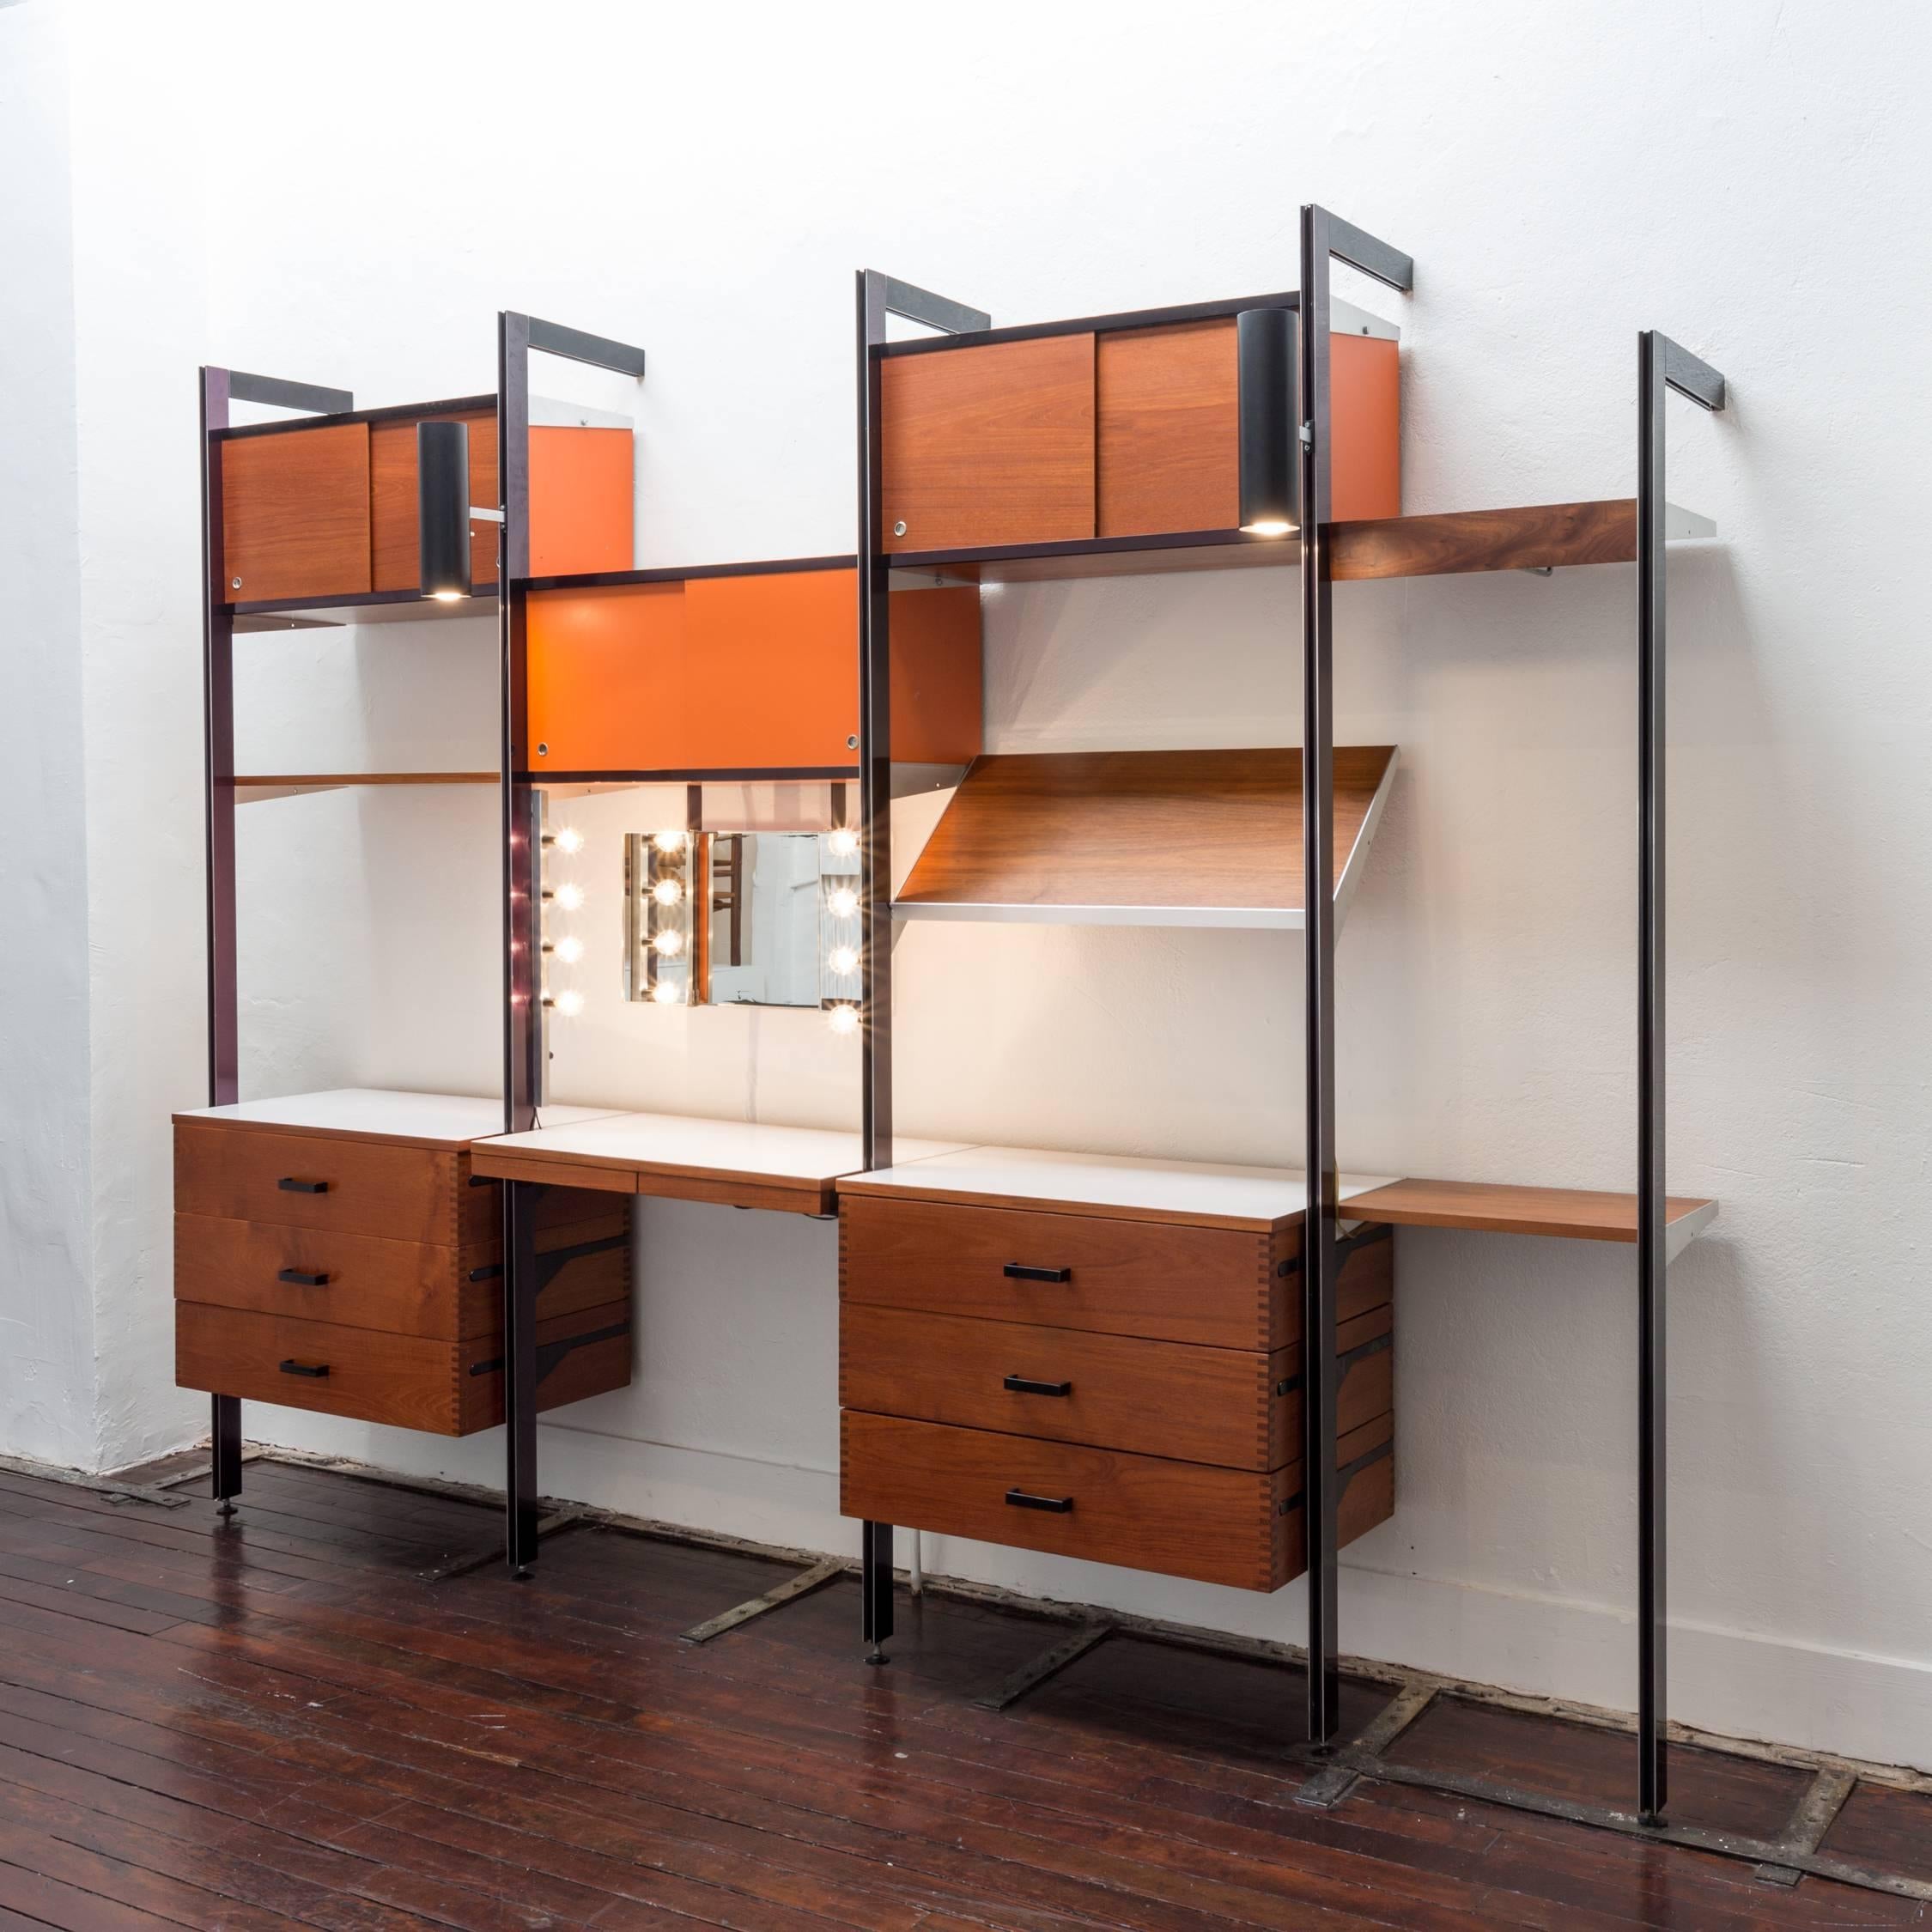 A rare CSS wall unit with residential modules, designed by George Nelson and produced by Herman Miller. The unit has four bays, including a prototype 18